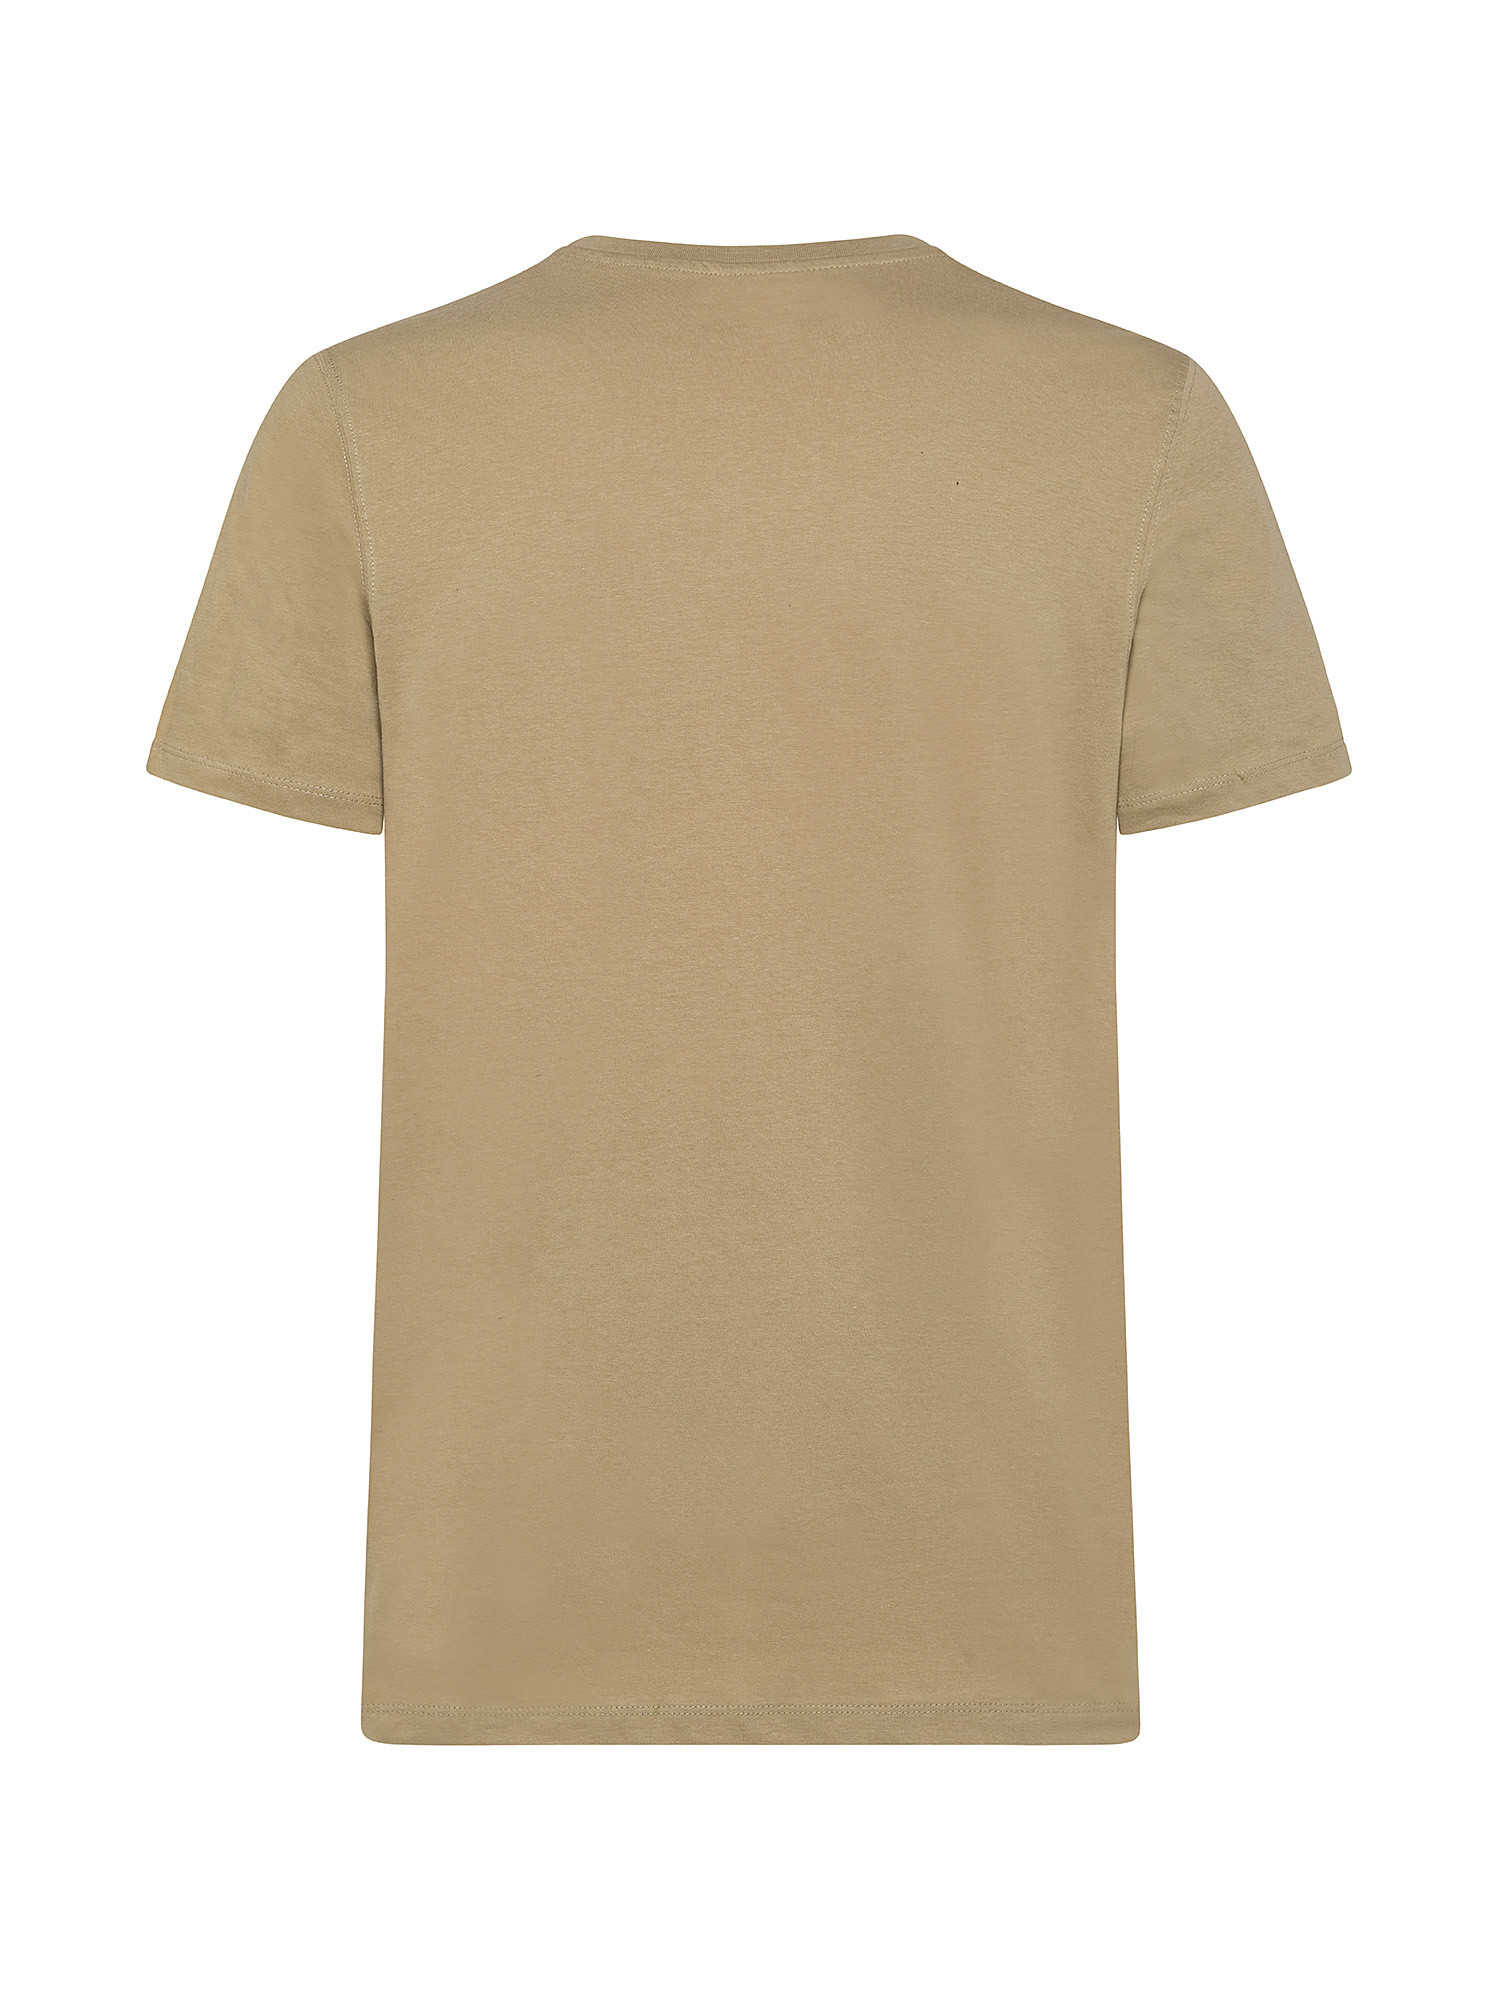 T-shirt with print, Beige, large image number 1